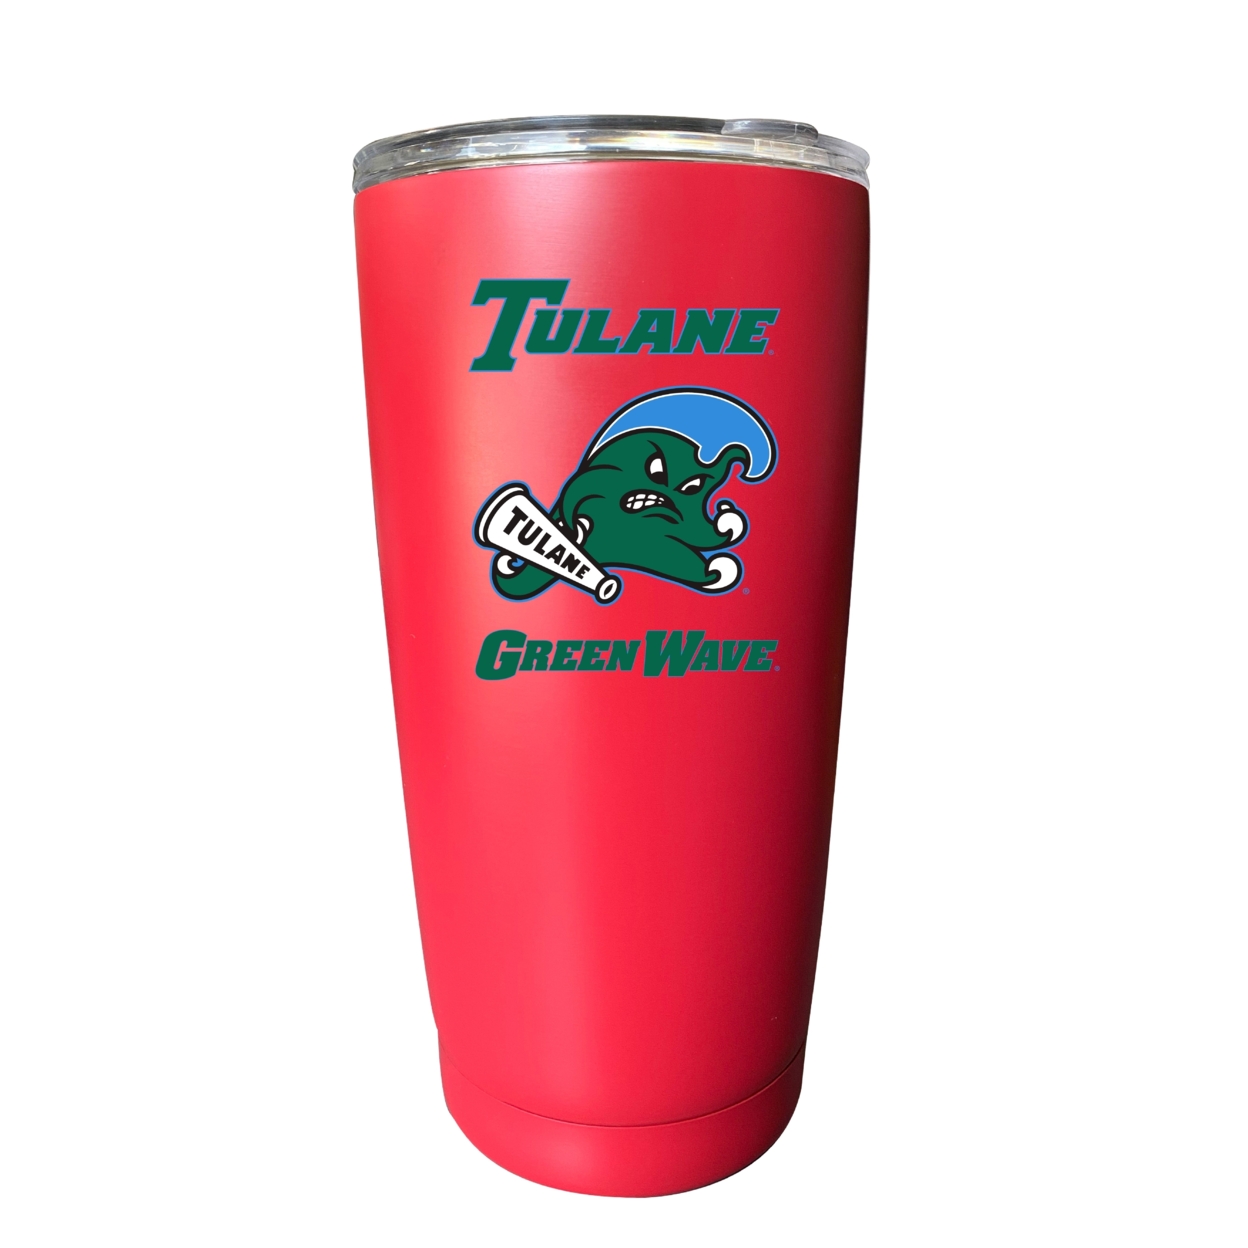 Tulane University Green Wave 16 Oz Insulated Stainless Steel Tumbler - Choose Your Color. - Seafoam